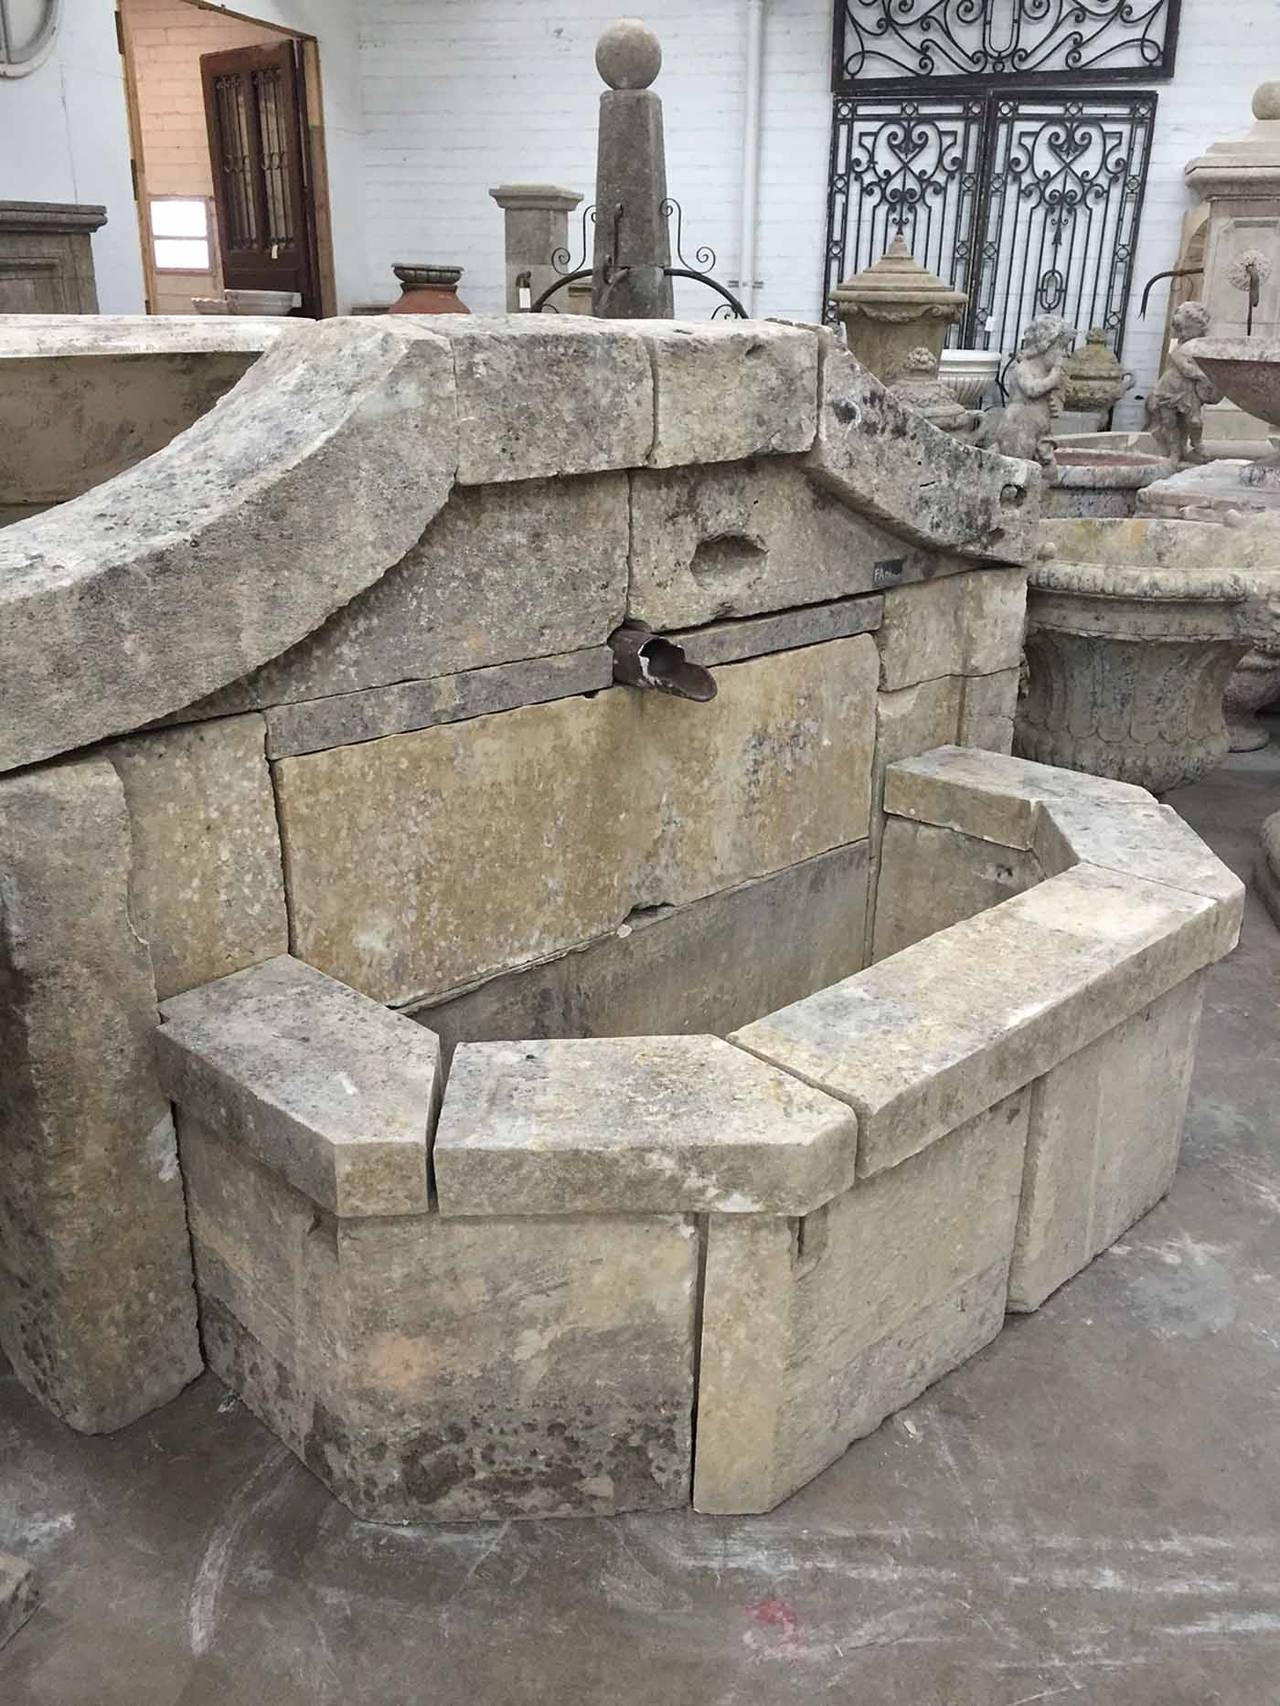 This fountain, composed of 18th/19th century stone, has a semi-octagonal wall and a large single water spout.